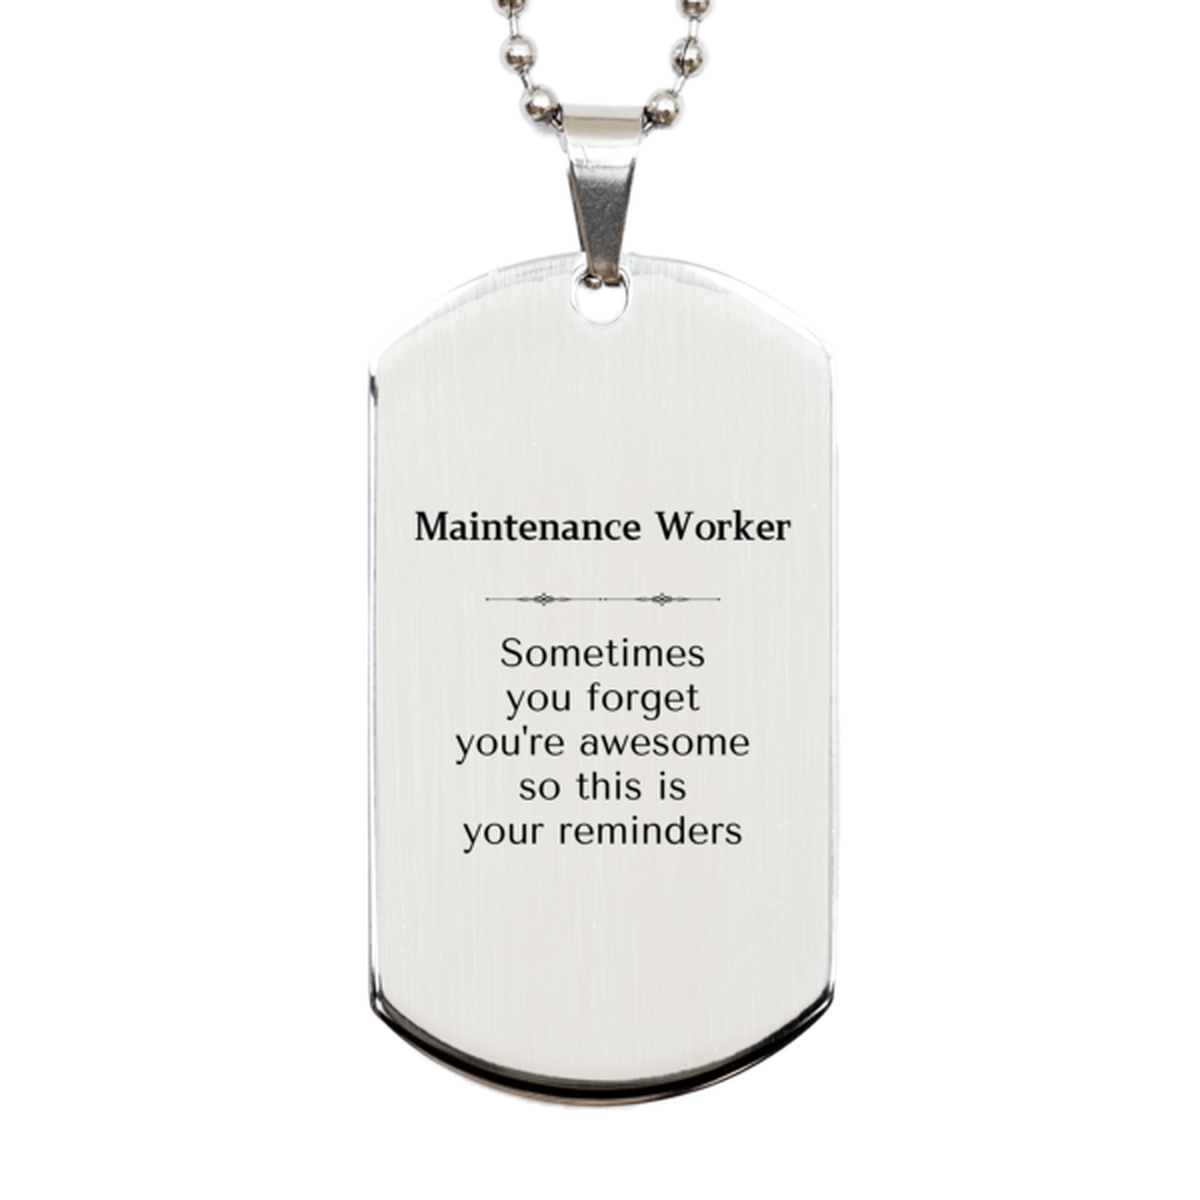 Sentimental Maintenance Worker Silver Dog Tag, Maintenance Worker Sometimes you forget you're awesome so this is your reminders, Graduation Christmas Birthday Gifts for Maintenance Worker, Men, Women, Coworkers